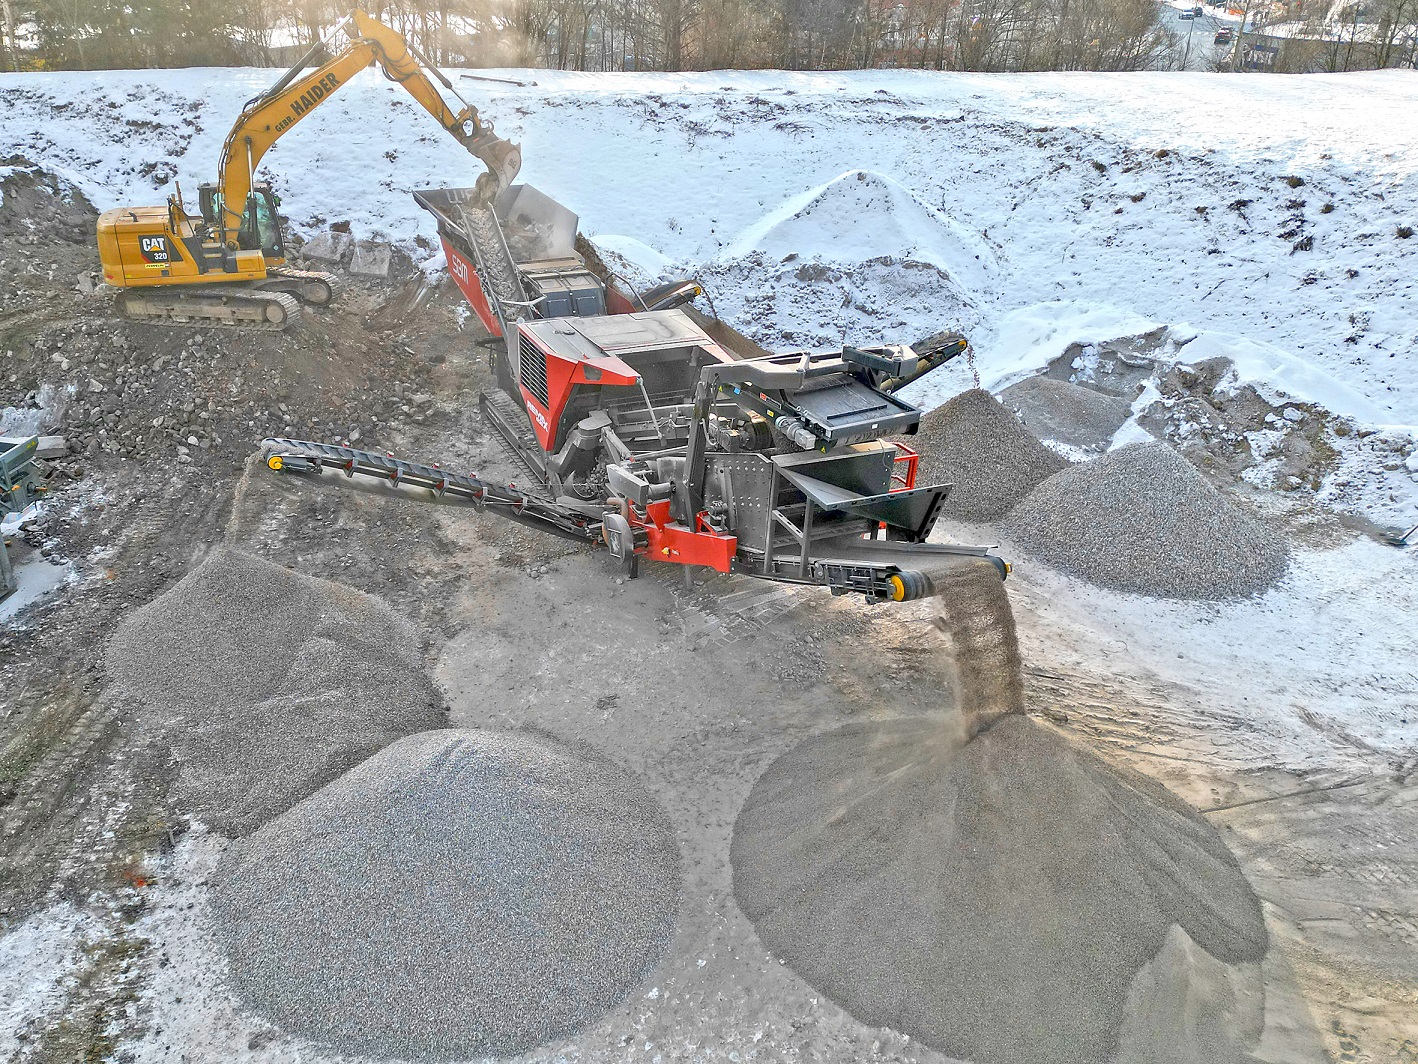 The REMAX 600 impact crusher at work processing material. Pic: SBM Mineral Processing